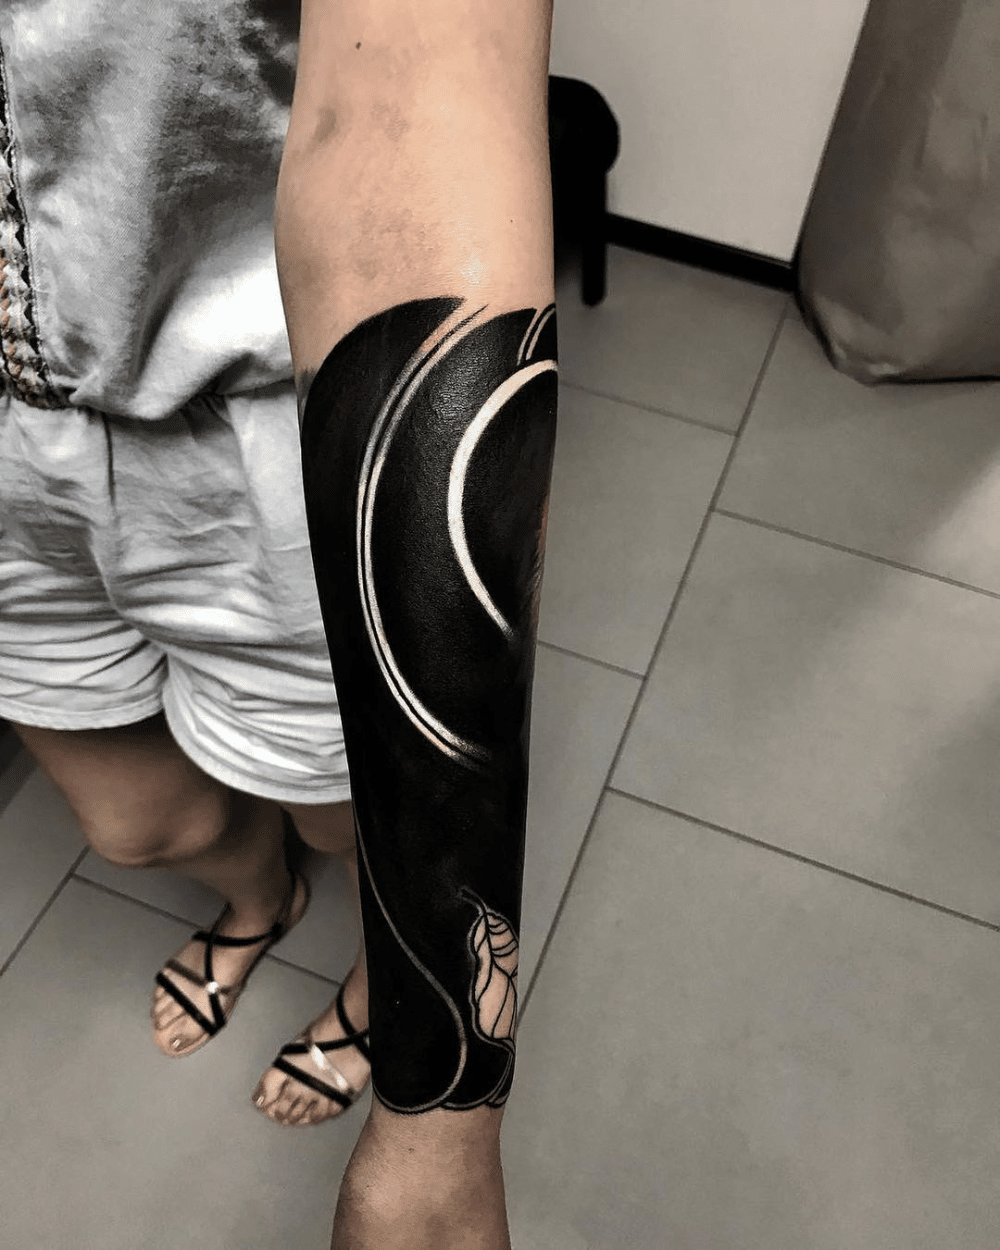 25 Beautiful Blackout Tattoos With White Ink On Top in 2021